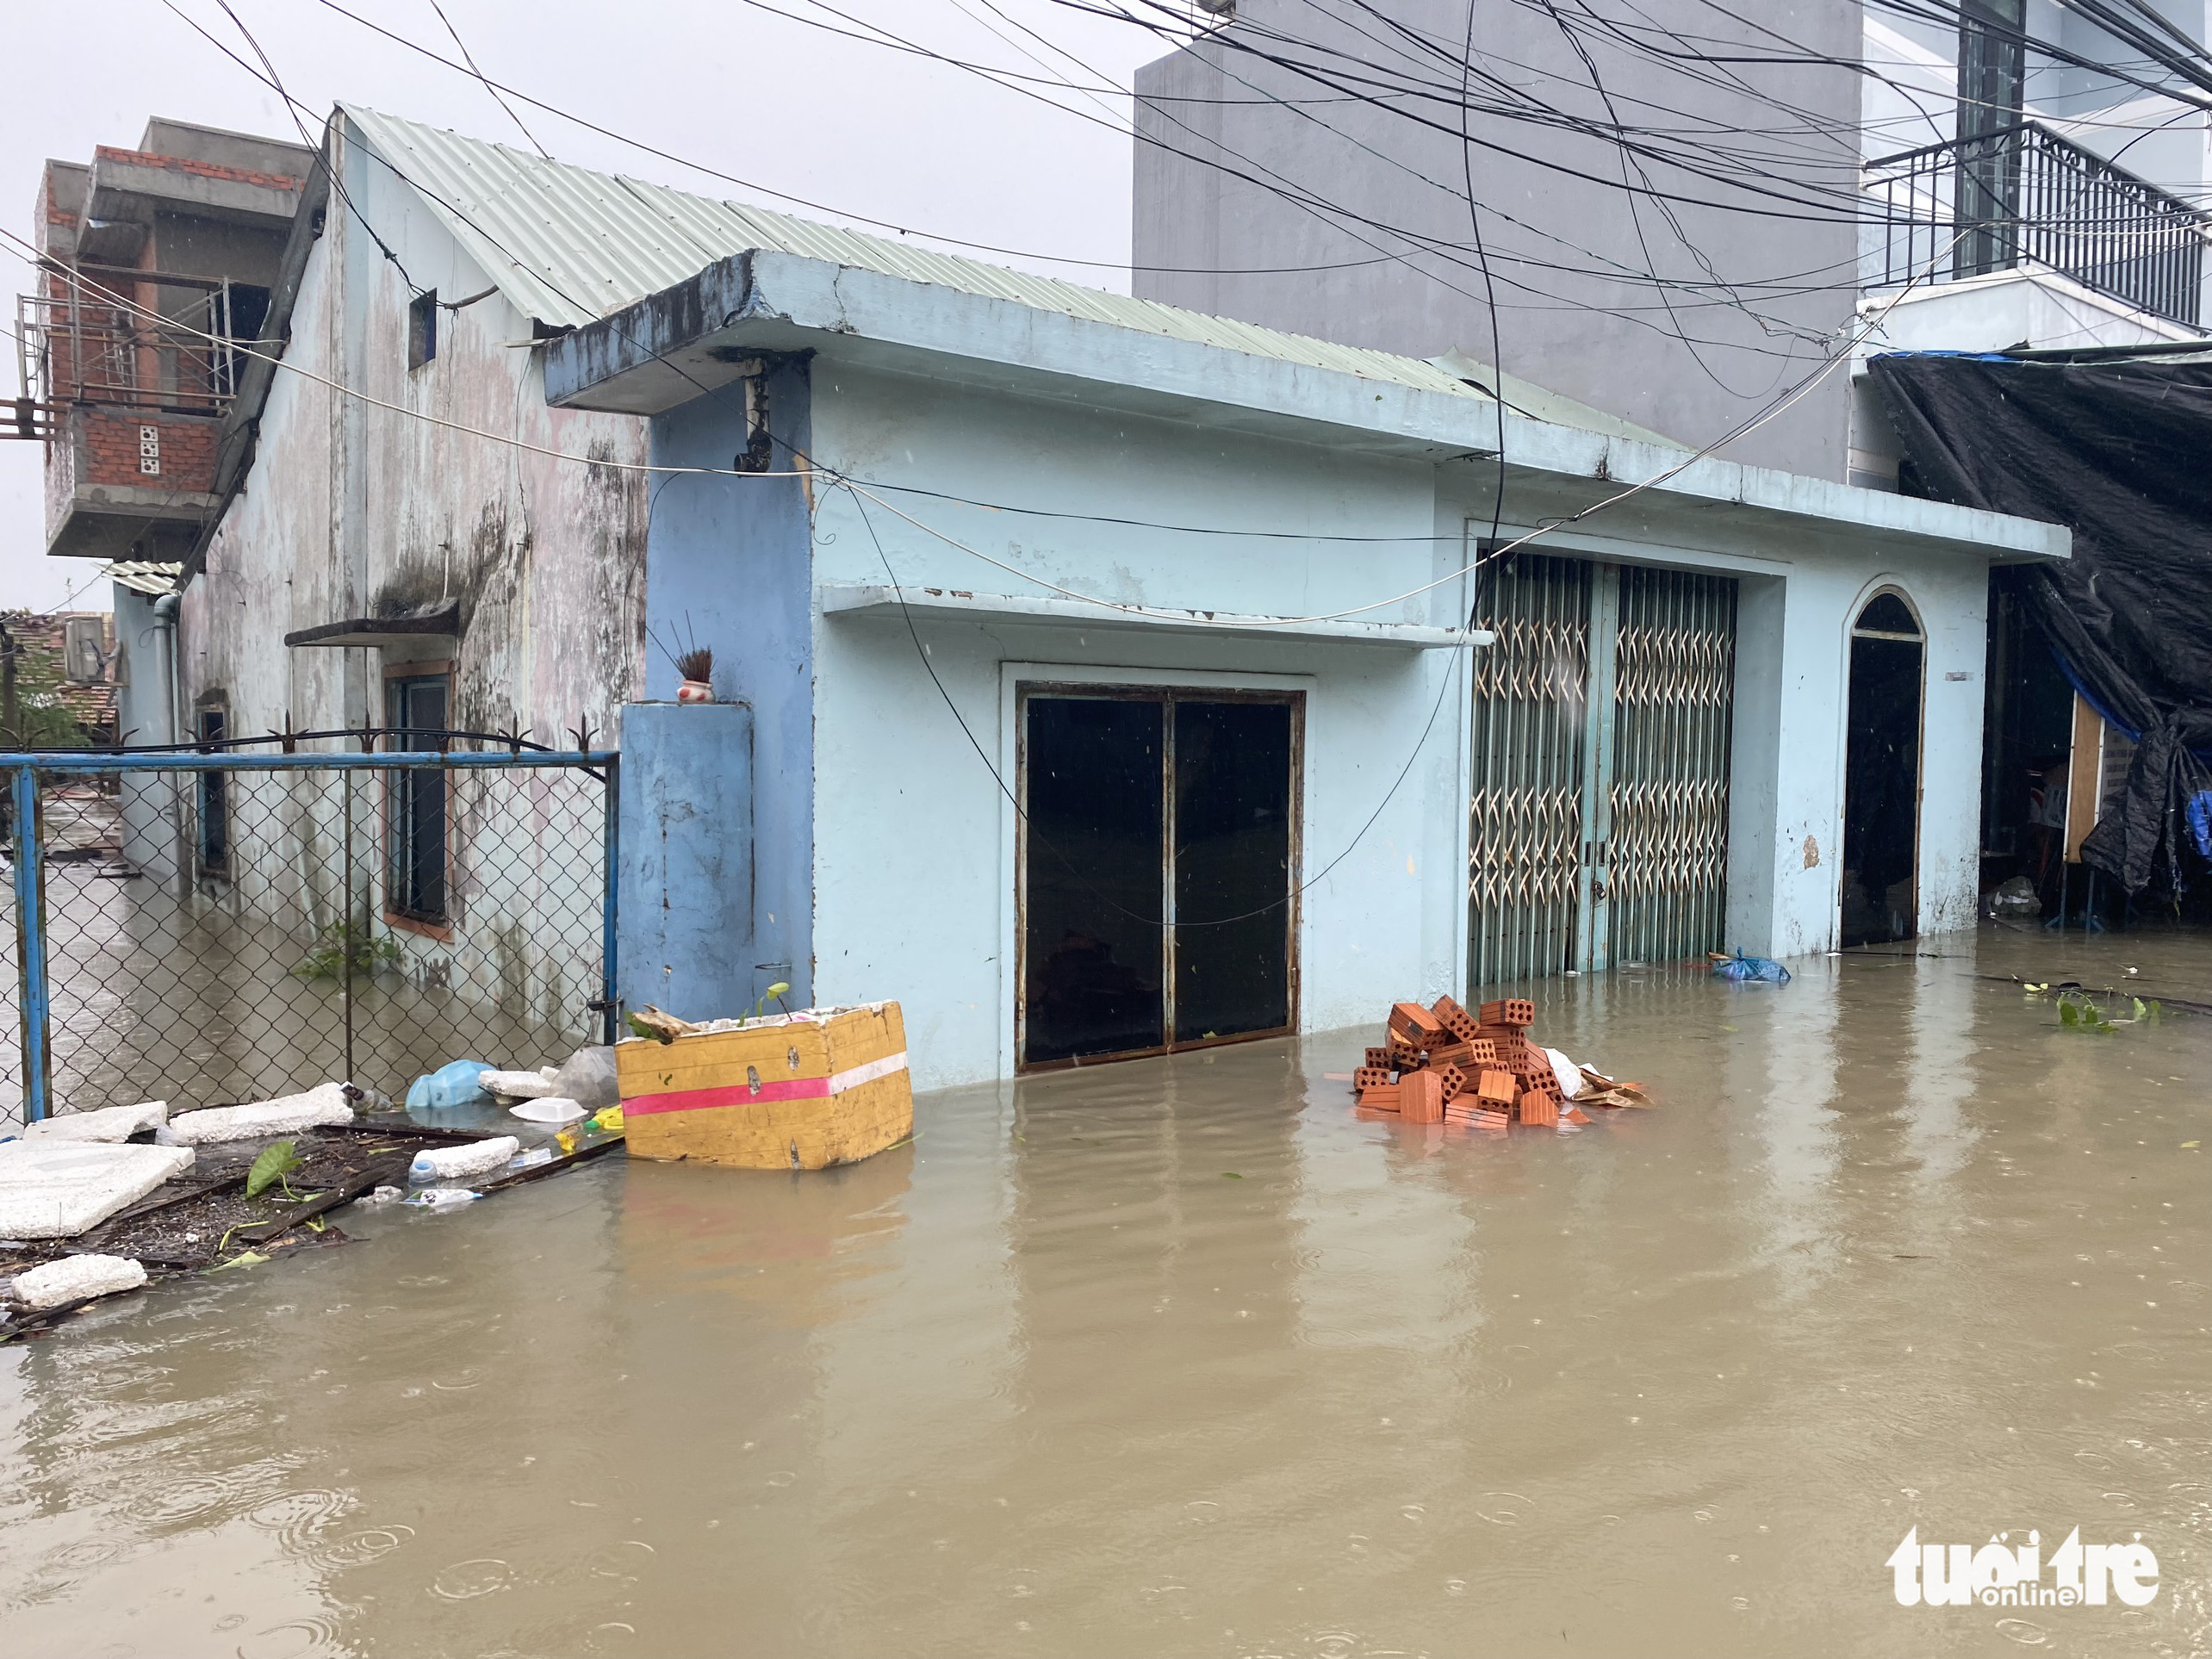 A neighborhood is flooded in Phu Ninh District, Quang Nam Province, Vietnam, September 28, 2022. Photo: Le Trung / Tuoi Tre